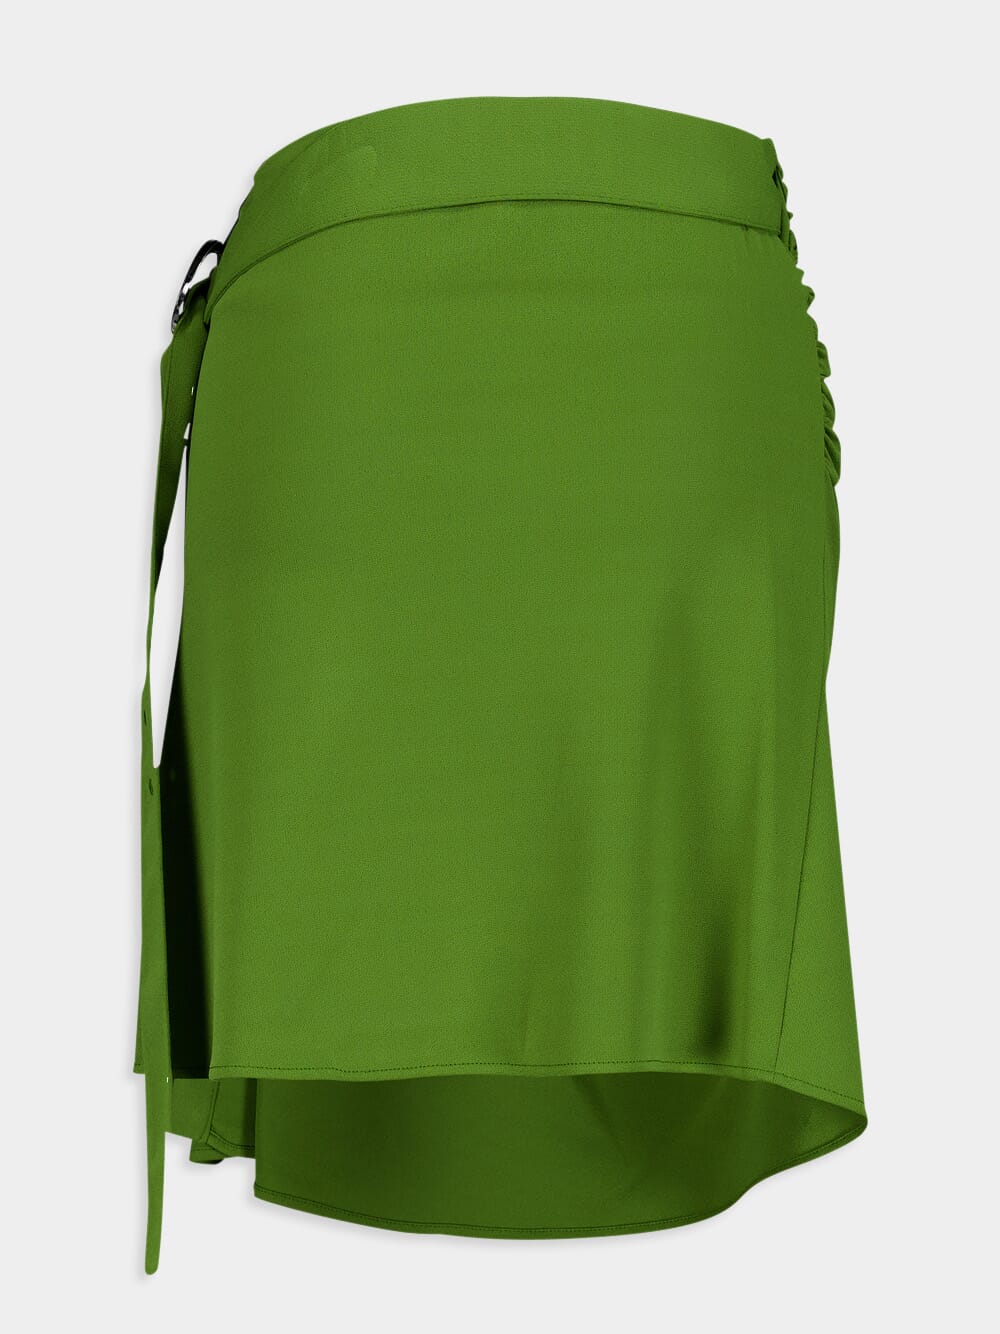 RabanneGreen Draped Skirt with Detail at Fashion Clinic